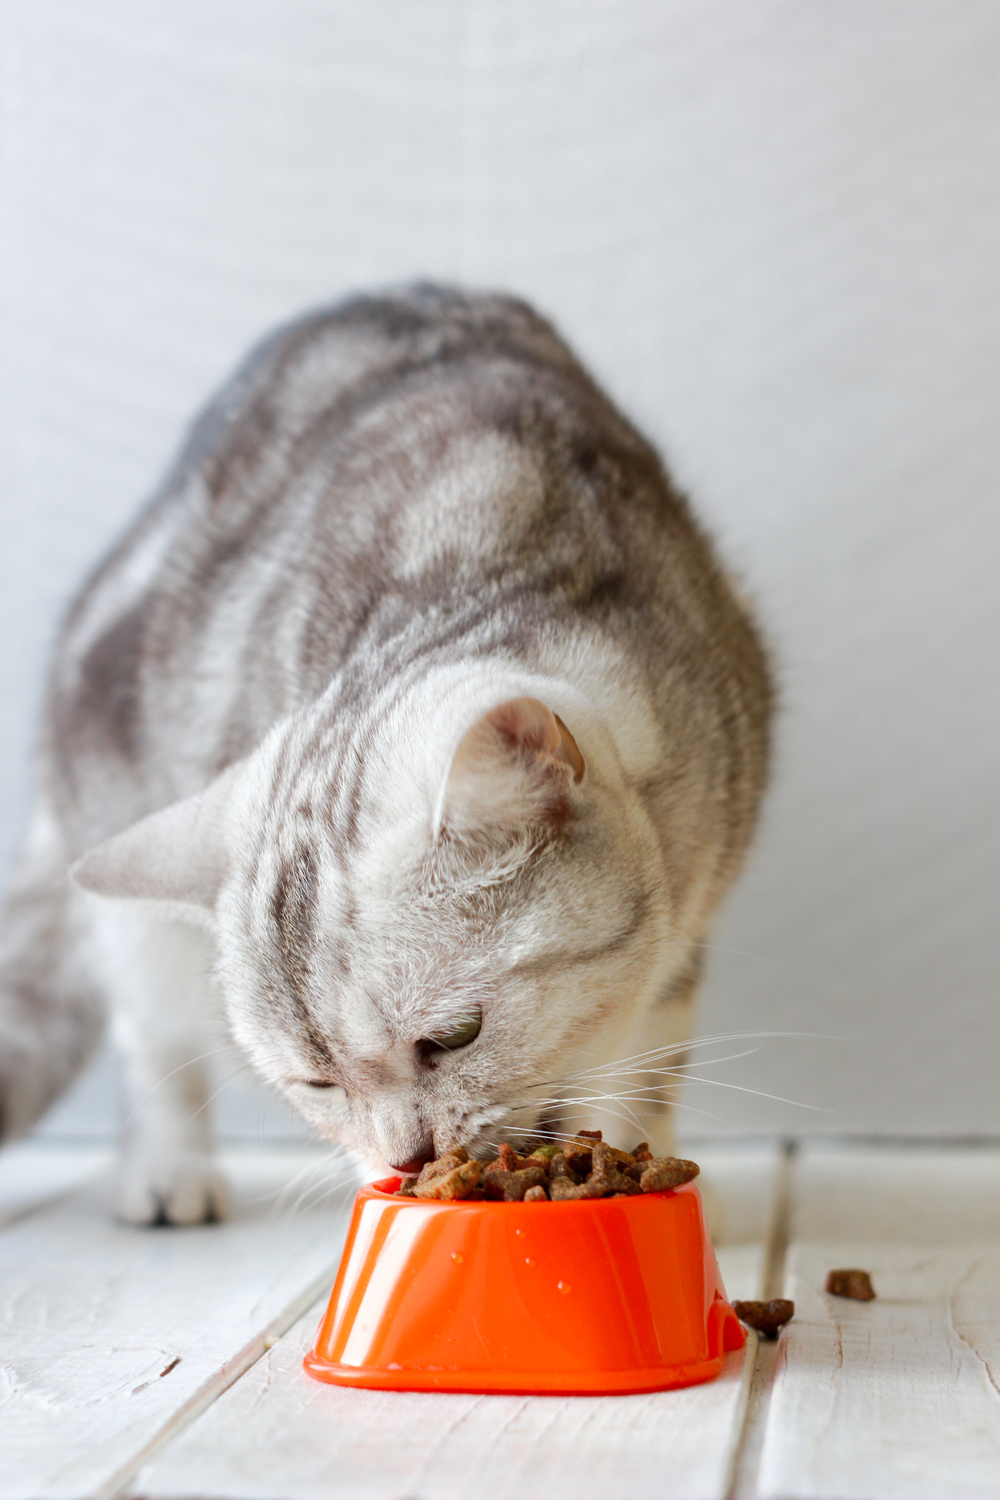 What to do if your cat eats plastic